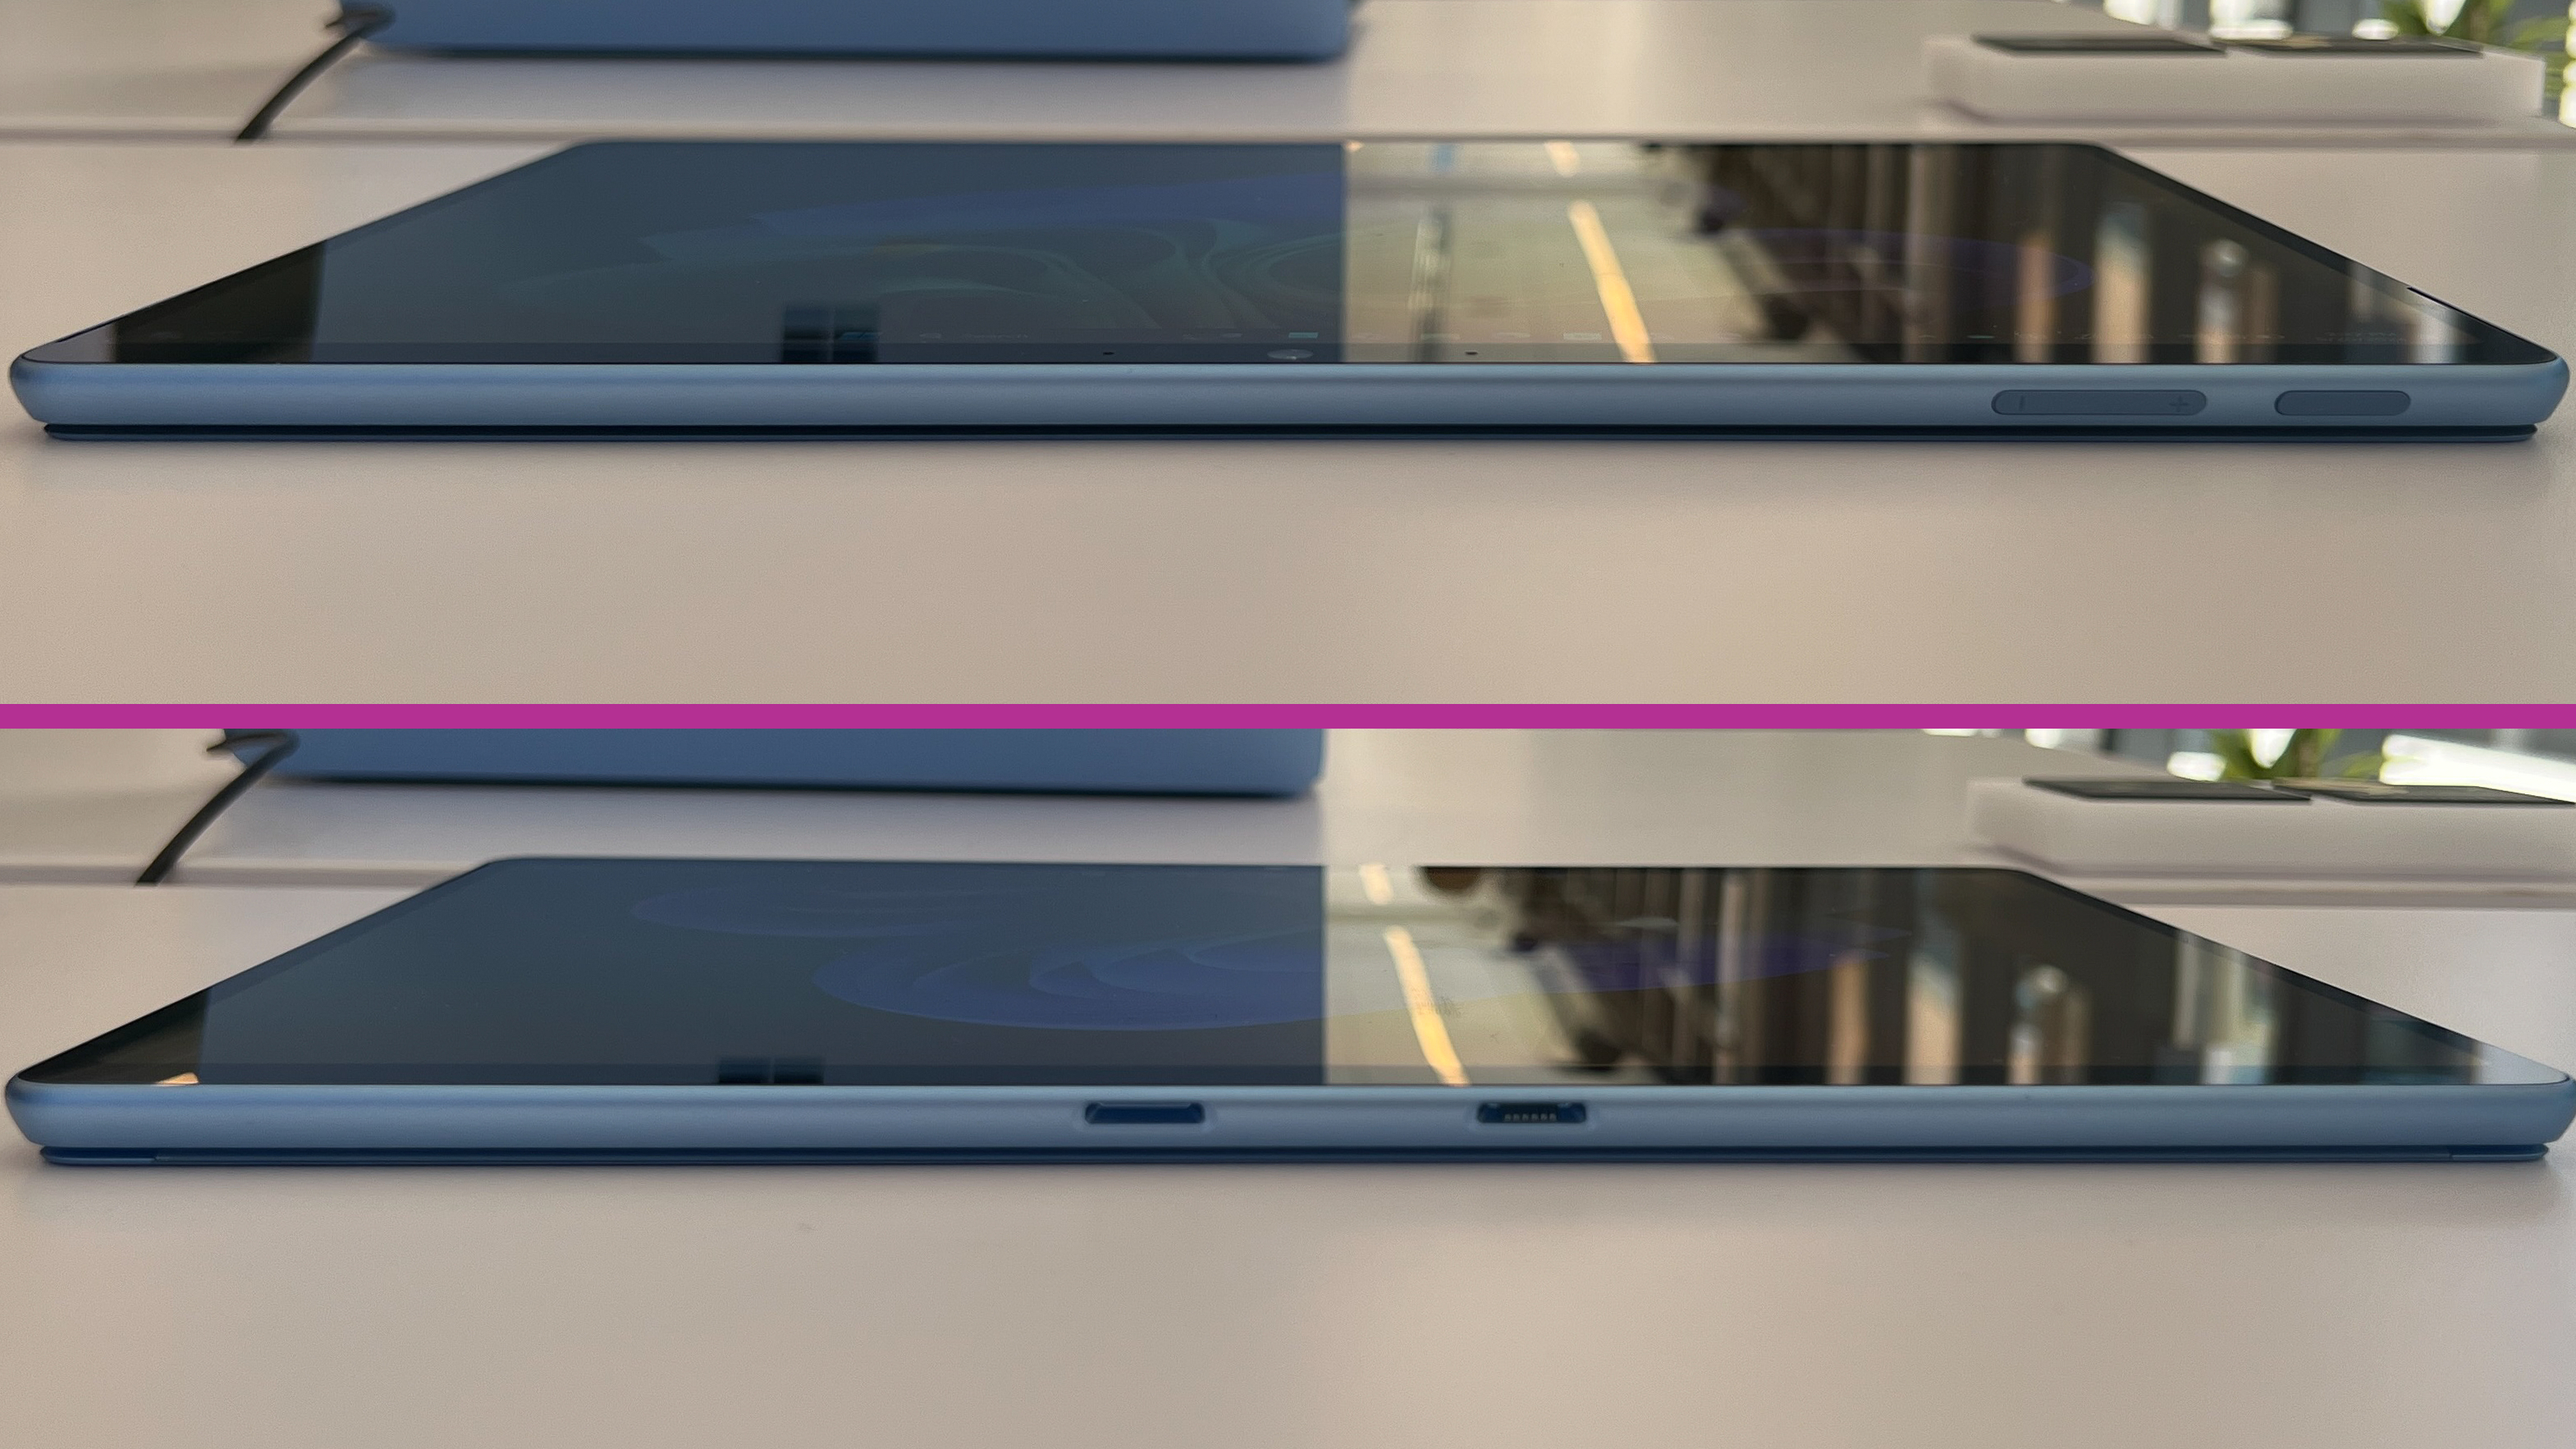 A composite image of the long sides of the Surface Pro